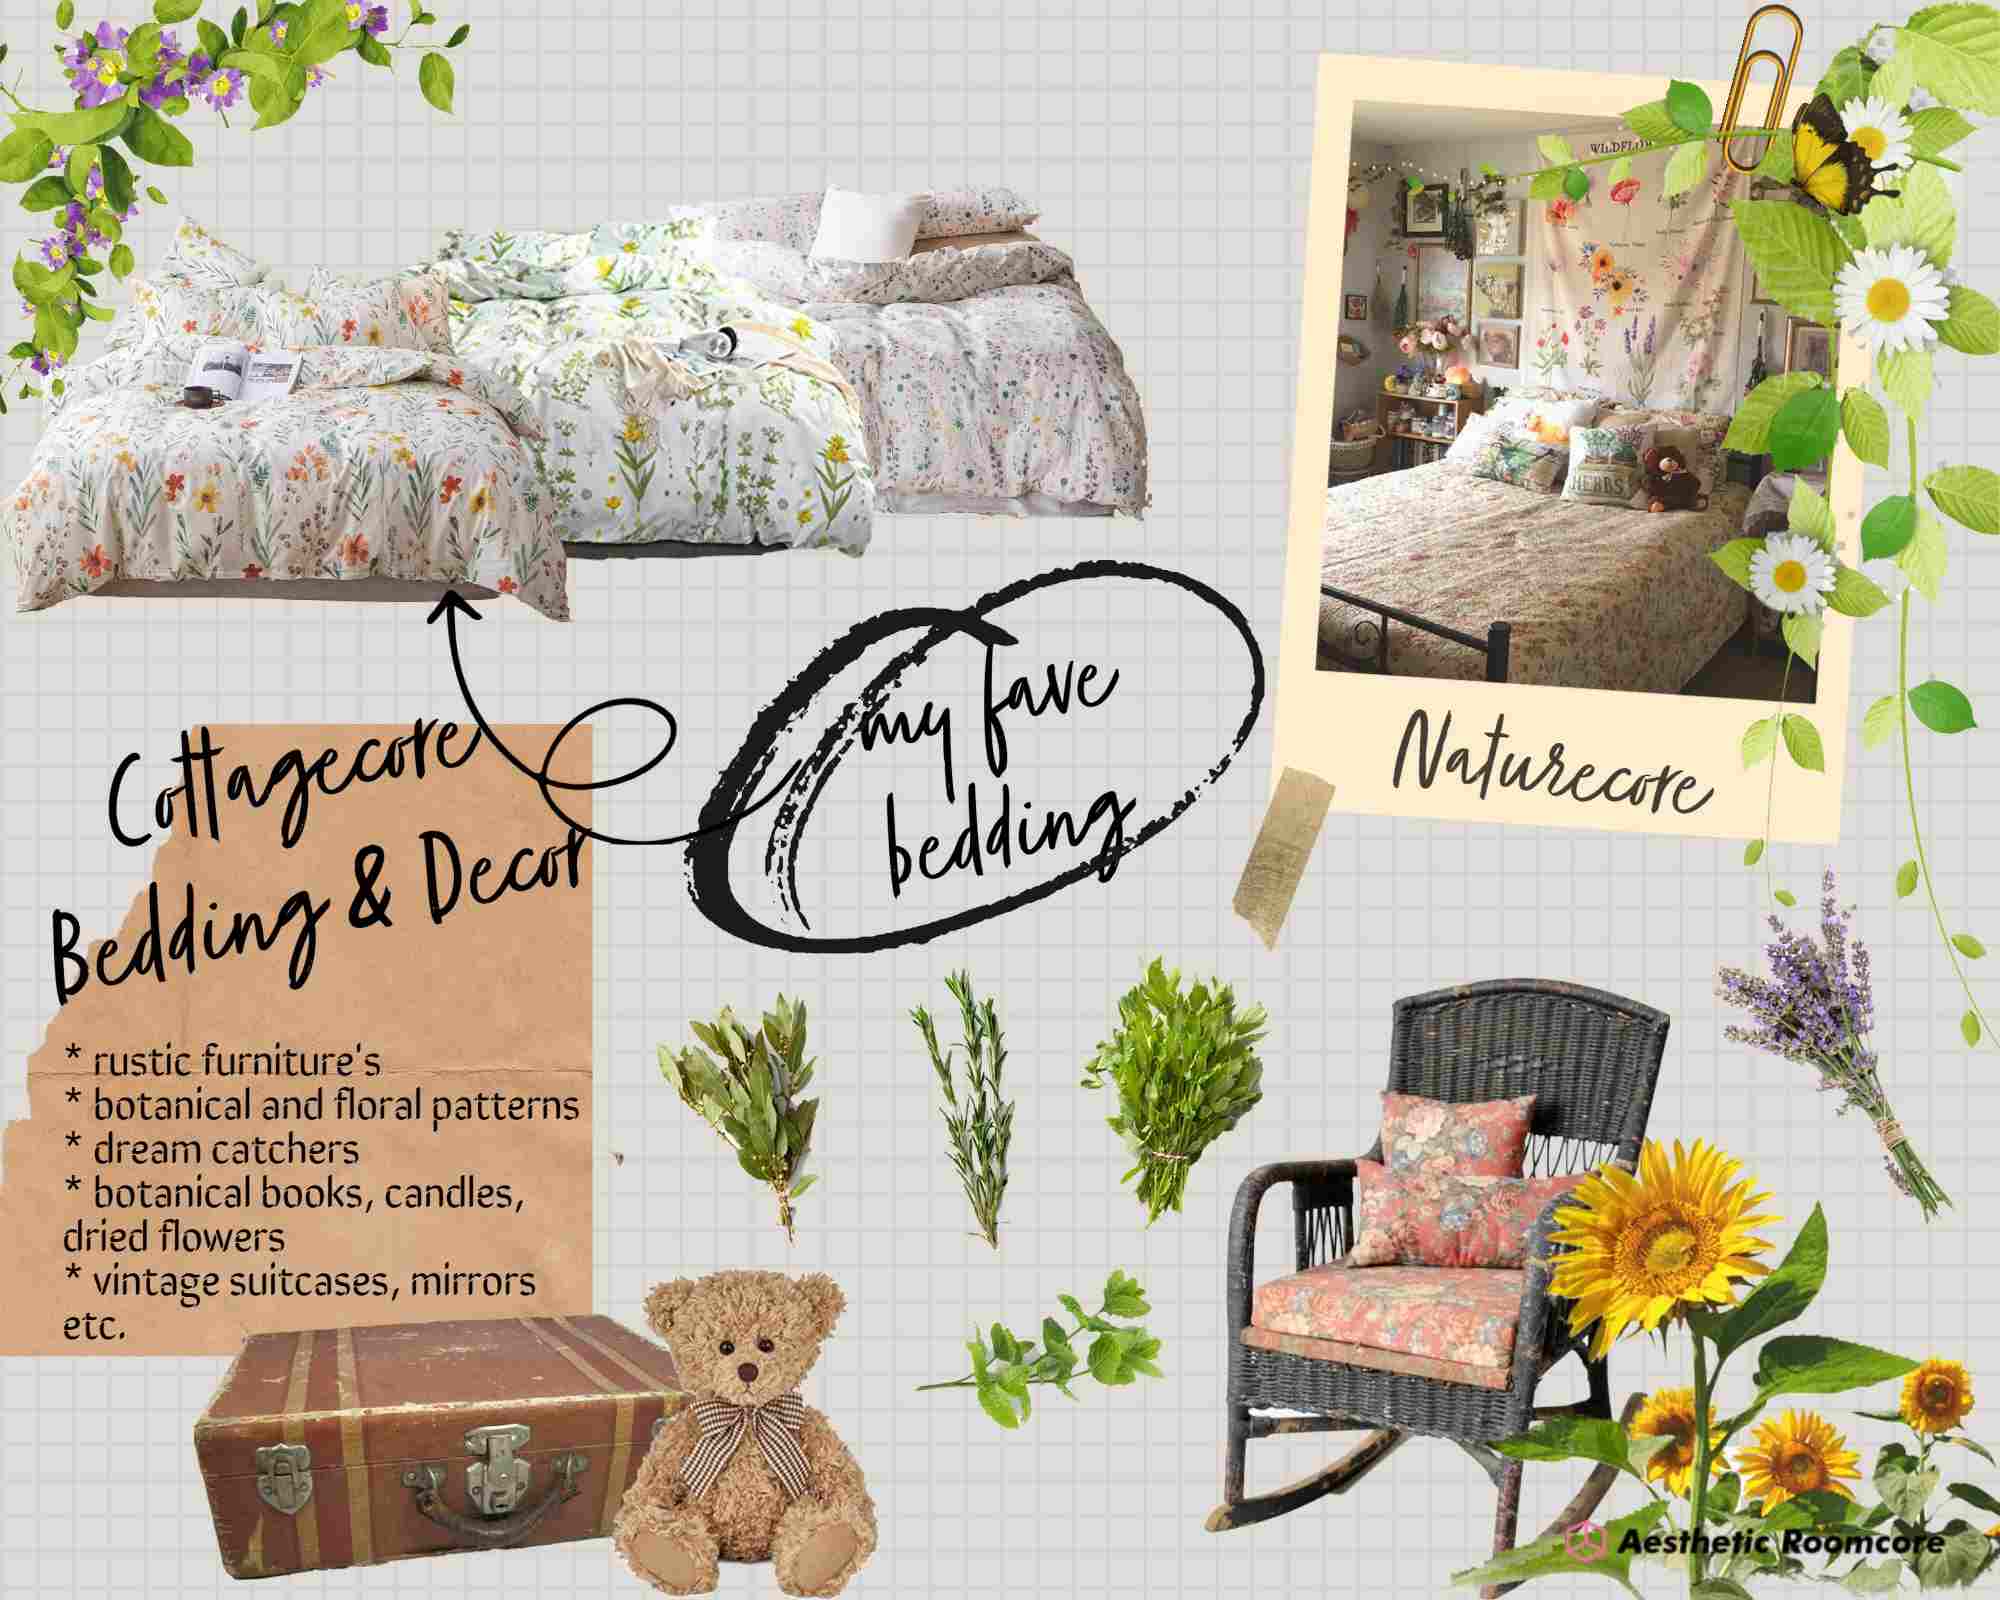 How to Create a Cottagecore Aesthetic Room | Aesthetic Room